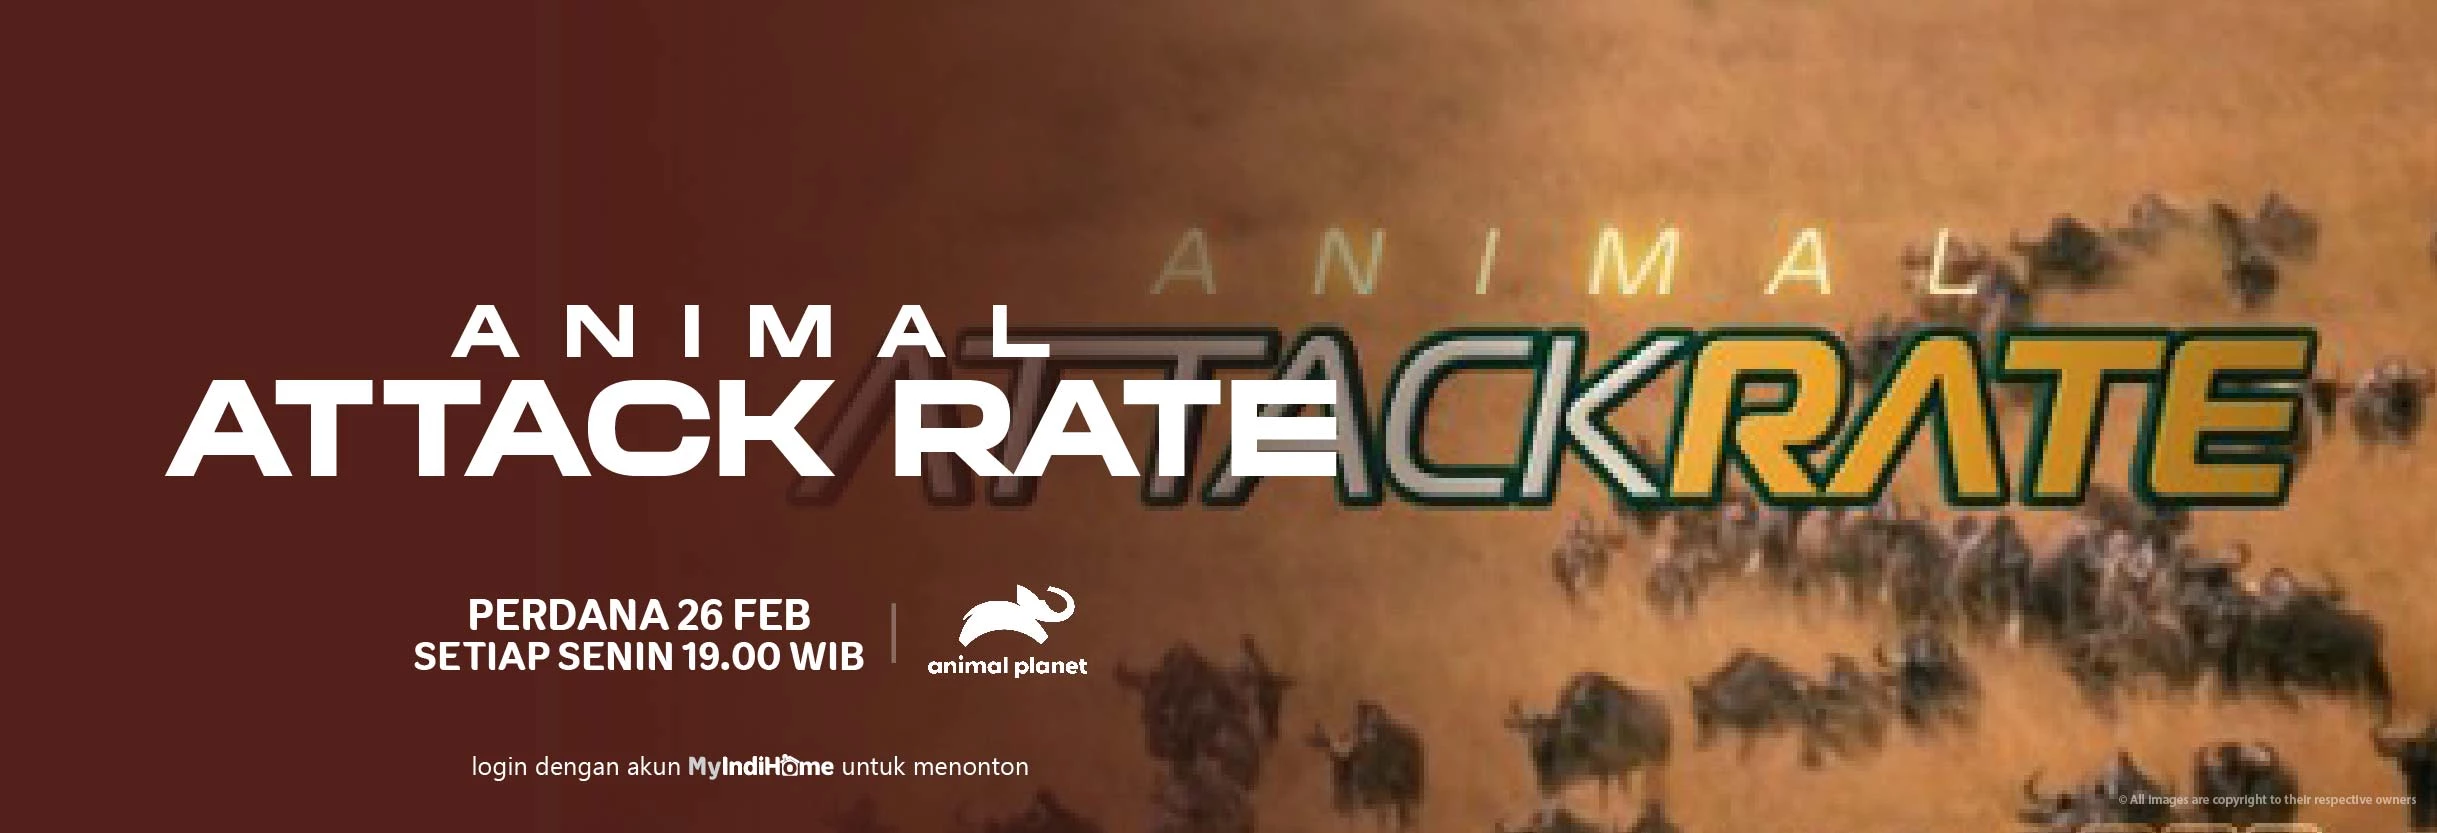 ANIMAL ATTACK RATE